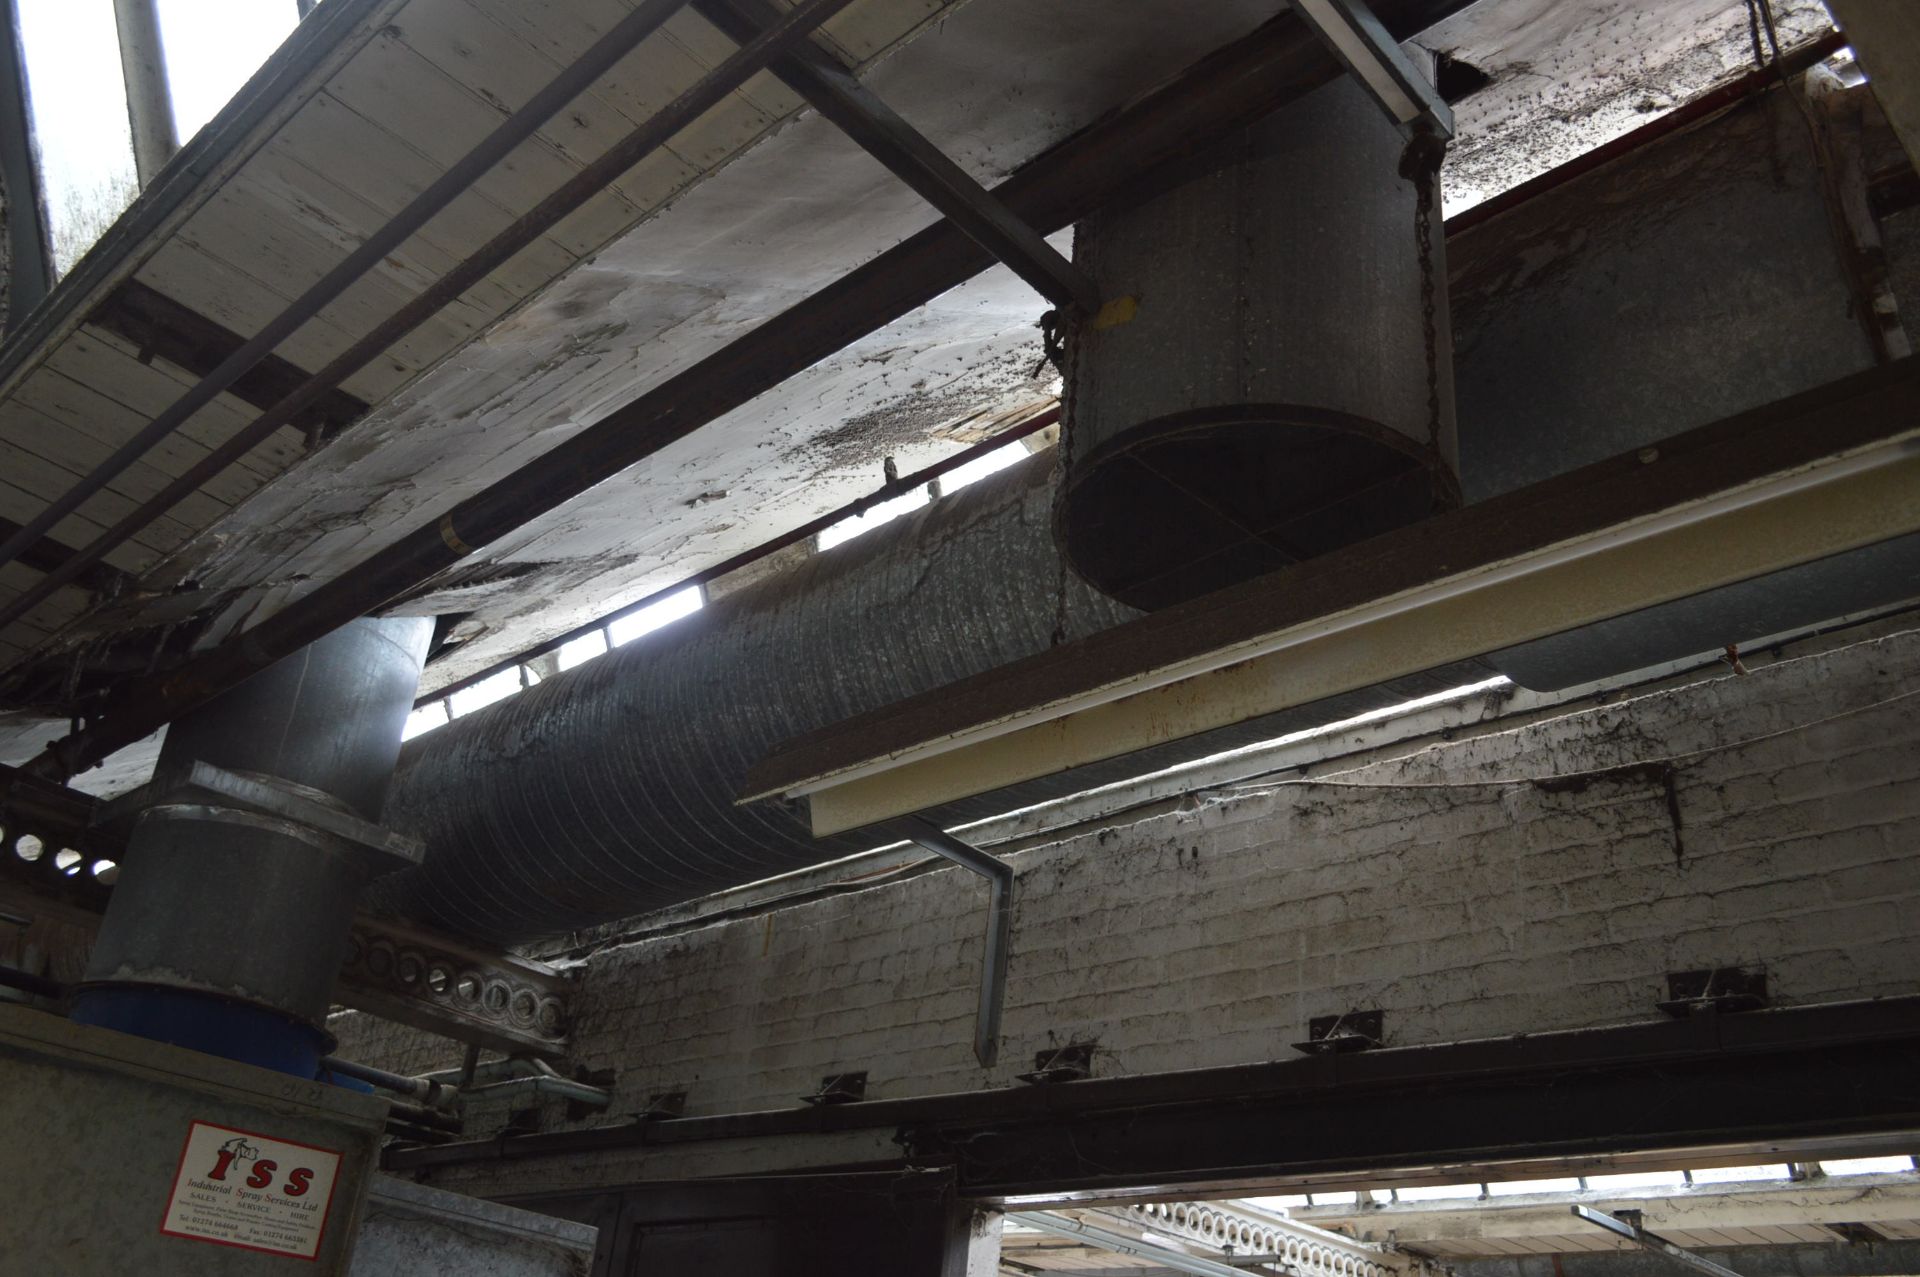 Extraction / Air Handling Ducting - Image 2 of 2